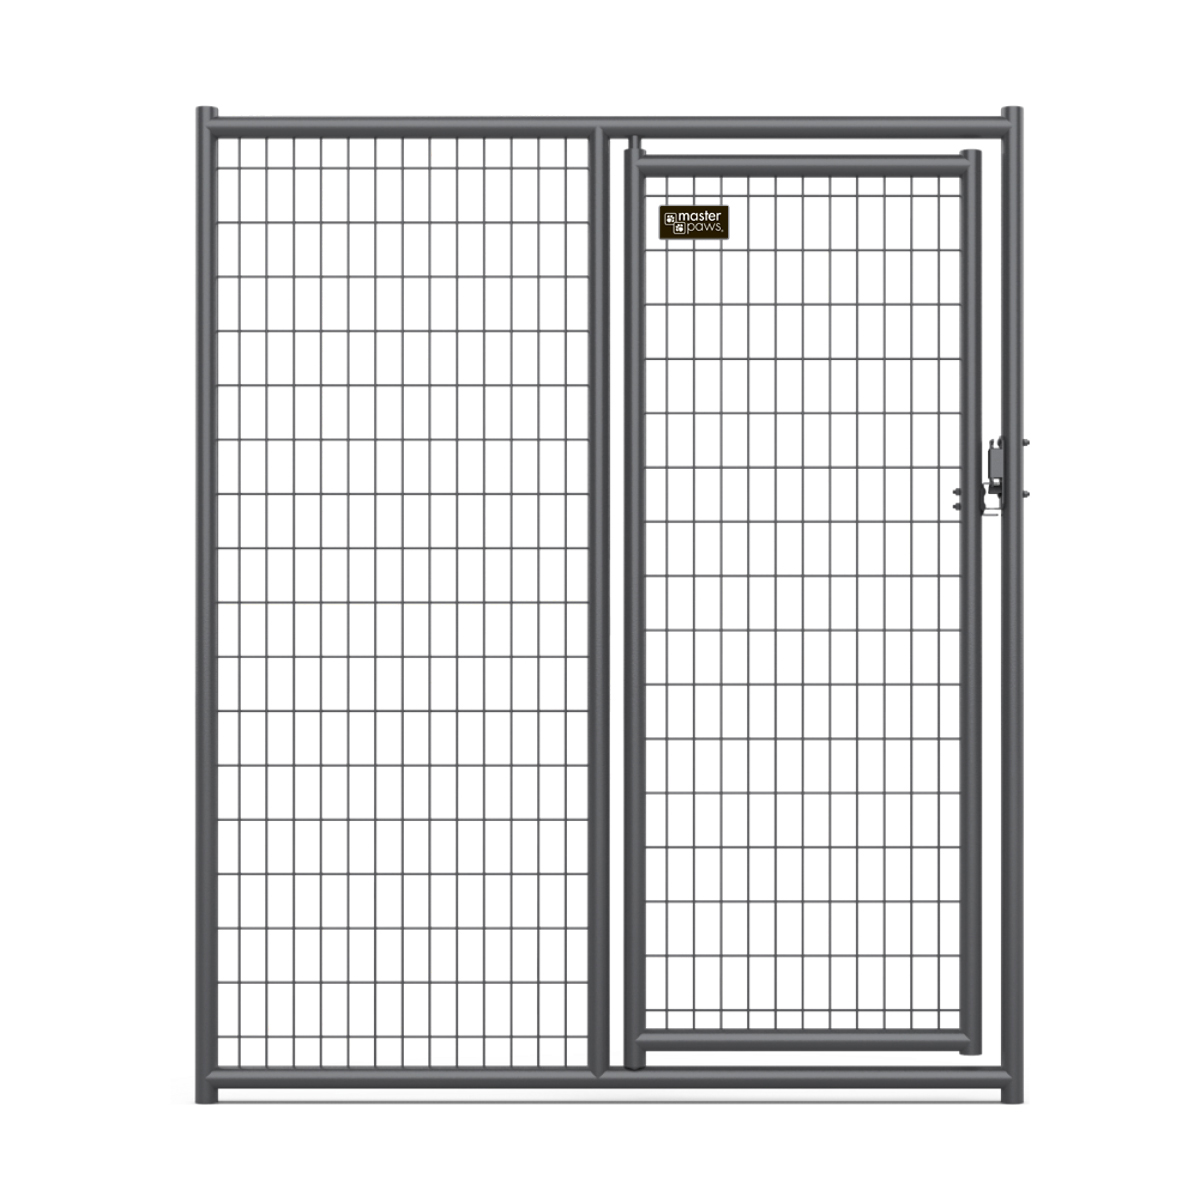 6ft H x 5ft W Commercial Grade Welded Wire Kennel Gate - Pet Kennels ...